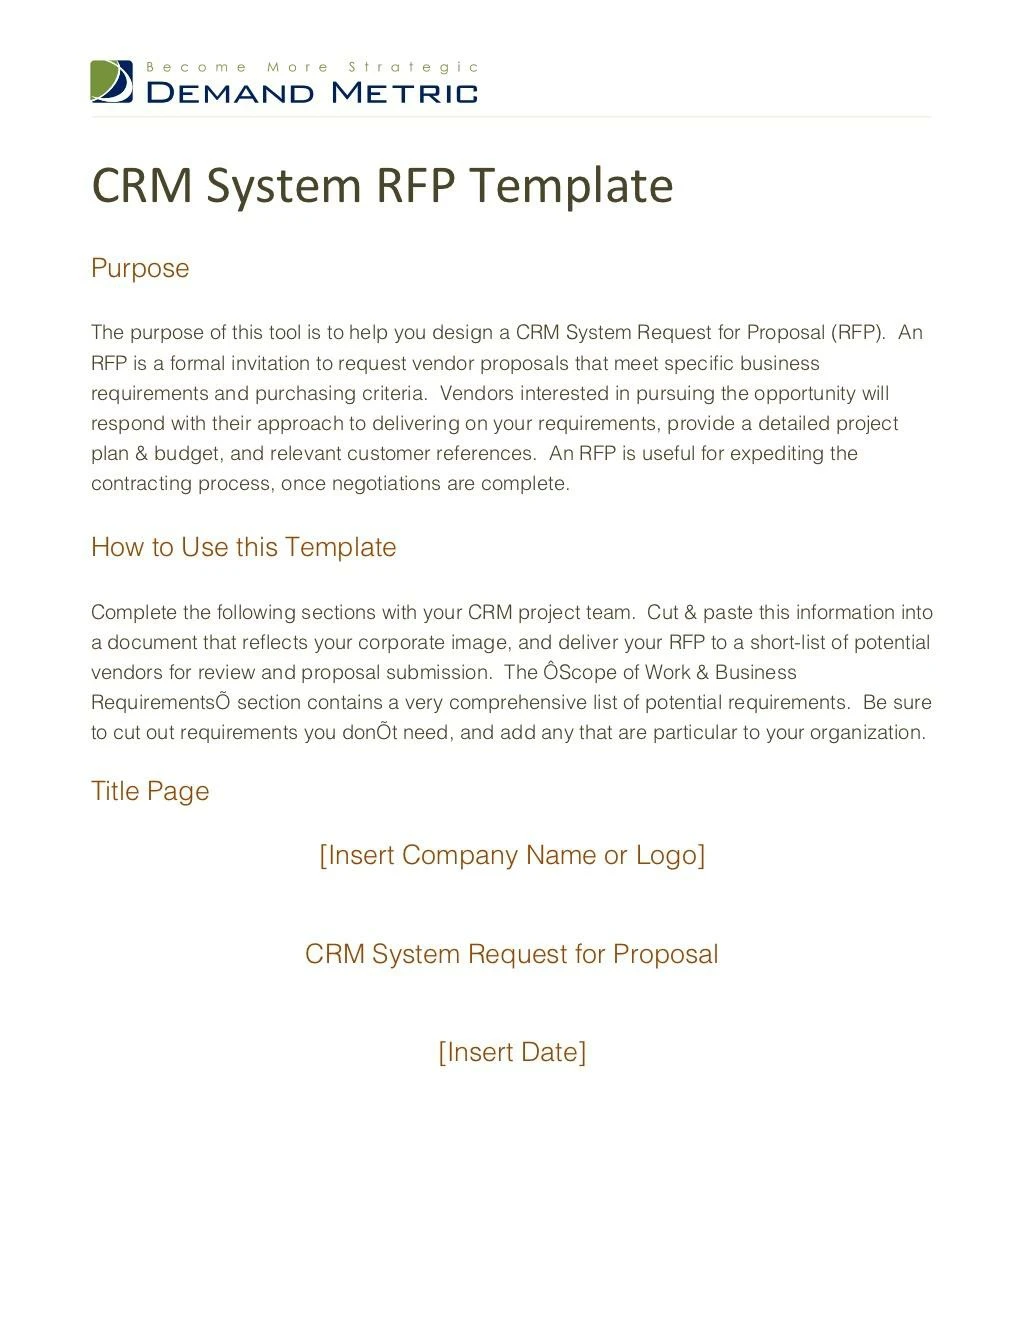 crm system rfp template